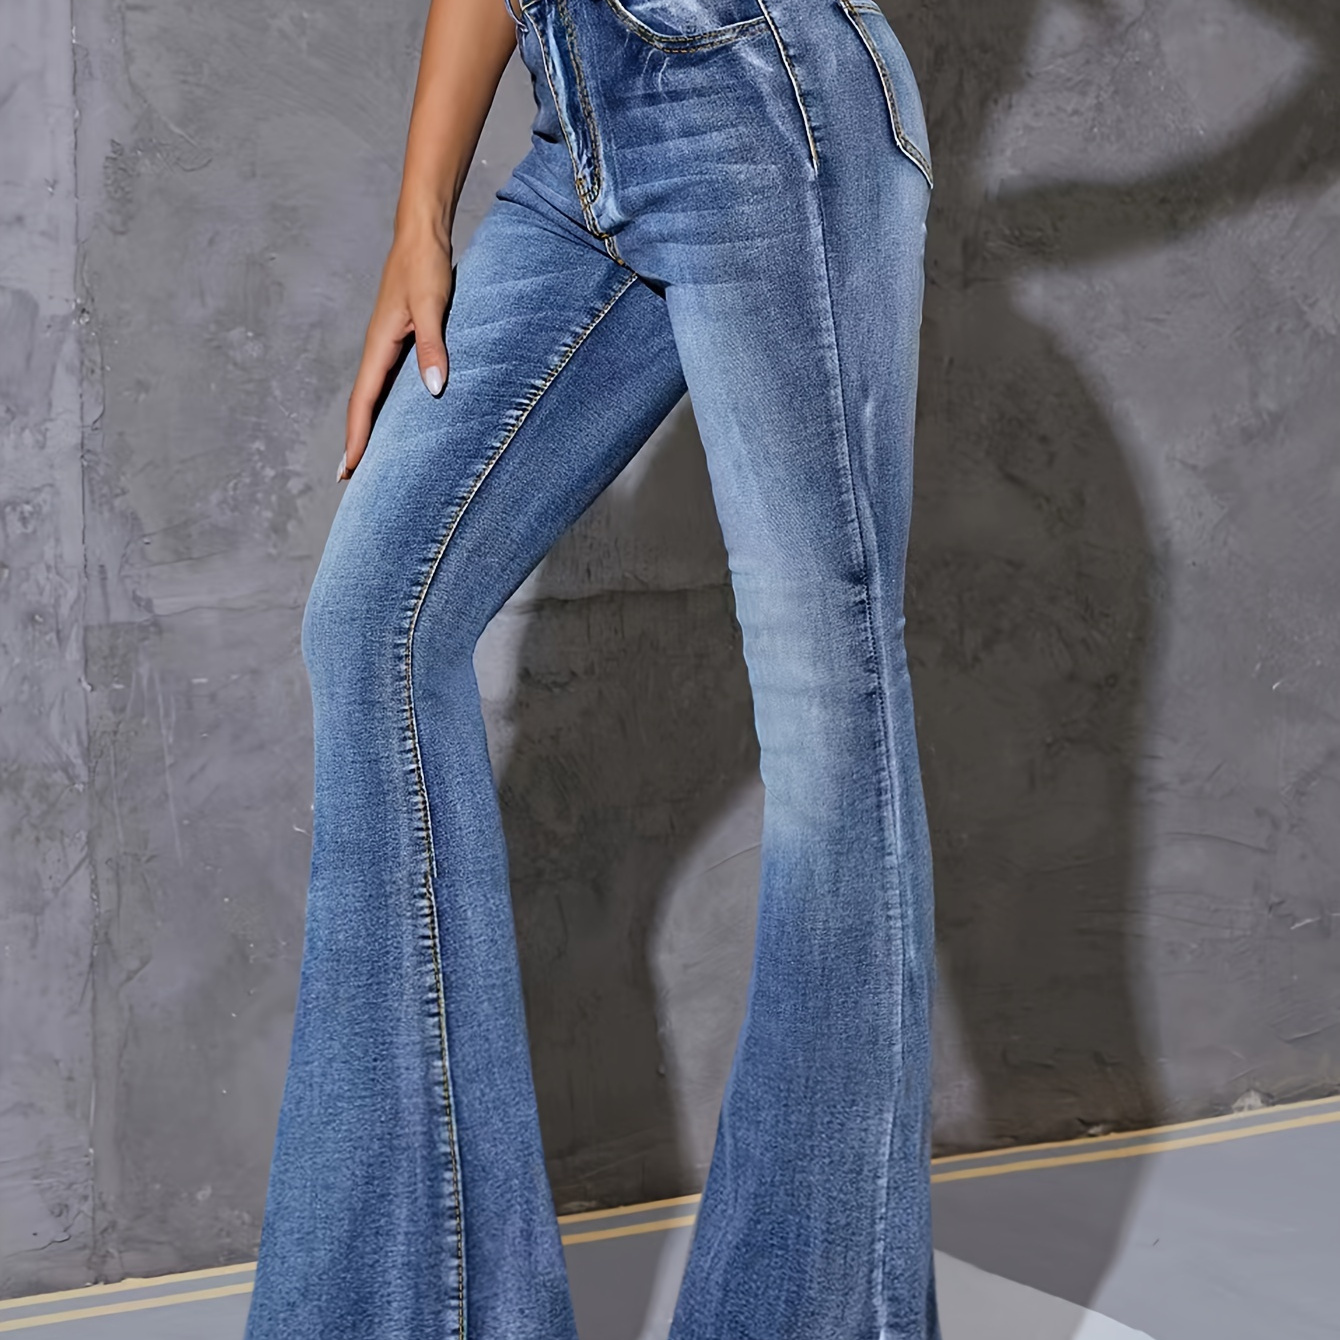 

High Stretch Washed Flare Jeans, Slant Pockets Whiskering Bell Bottom Jeans, Women's Denim Jeans & Clothing